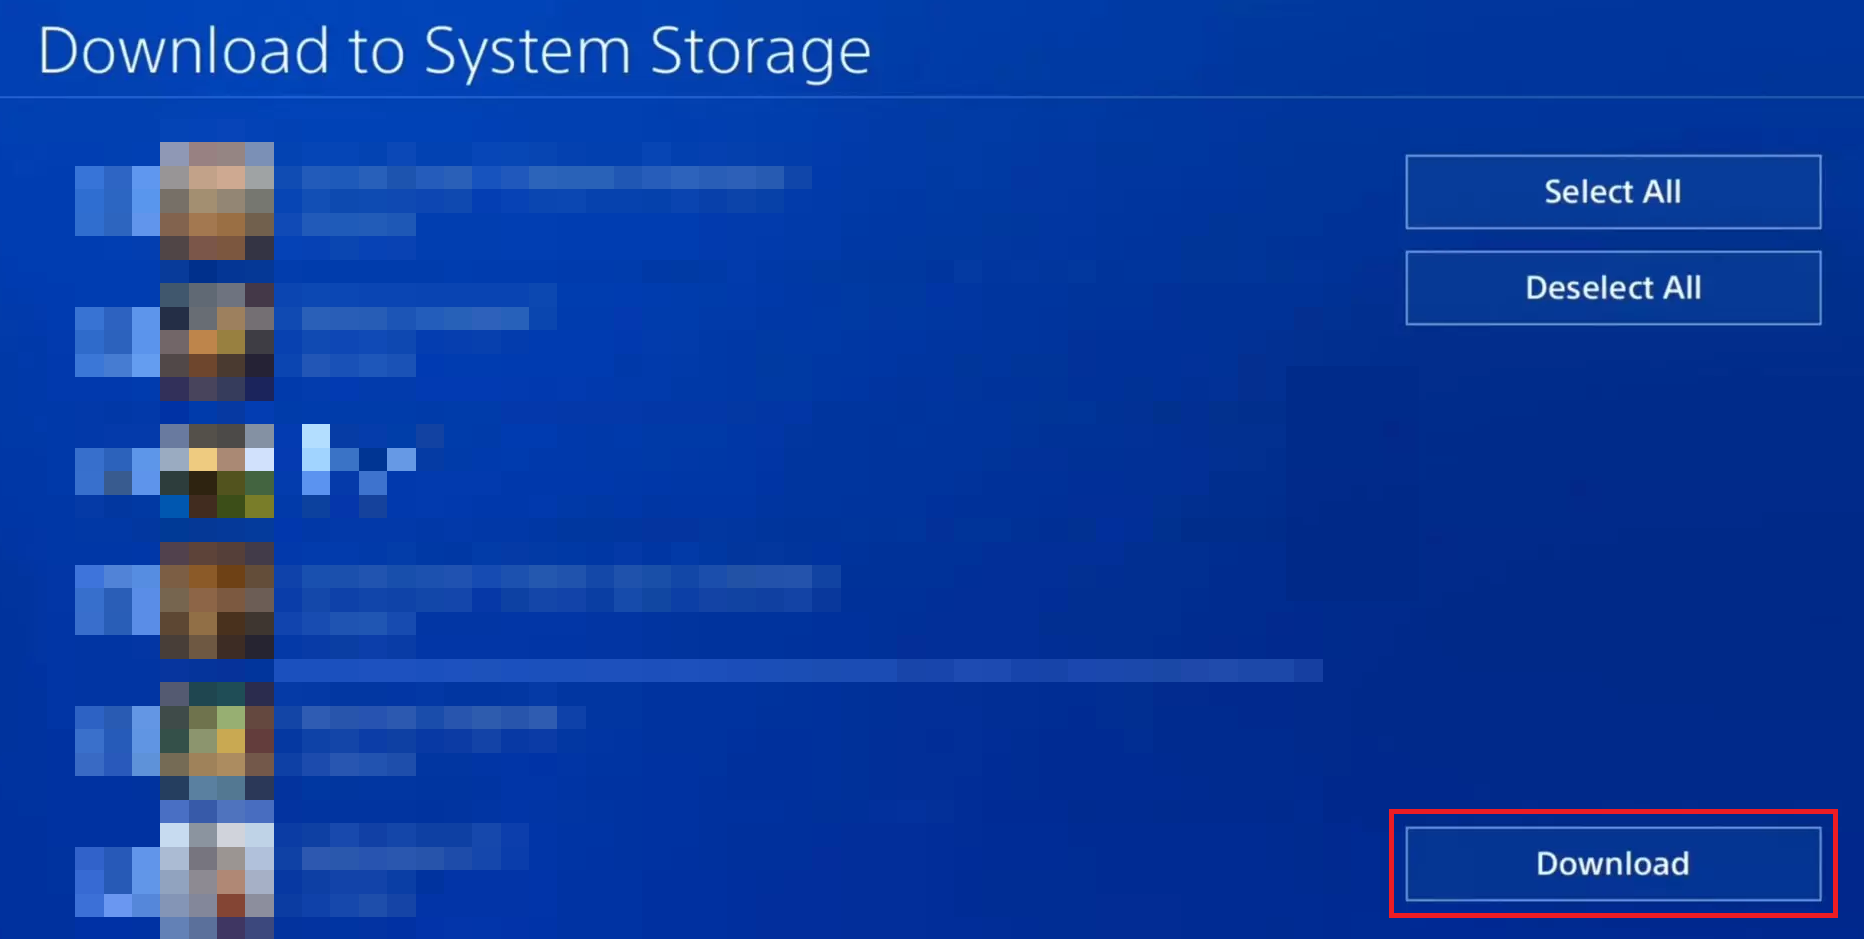 select the desired files and Download them to your PS4 system storage